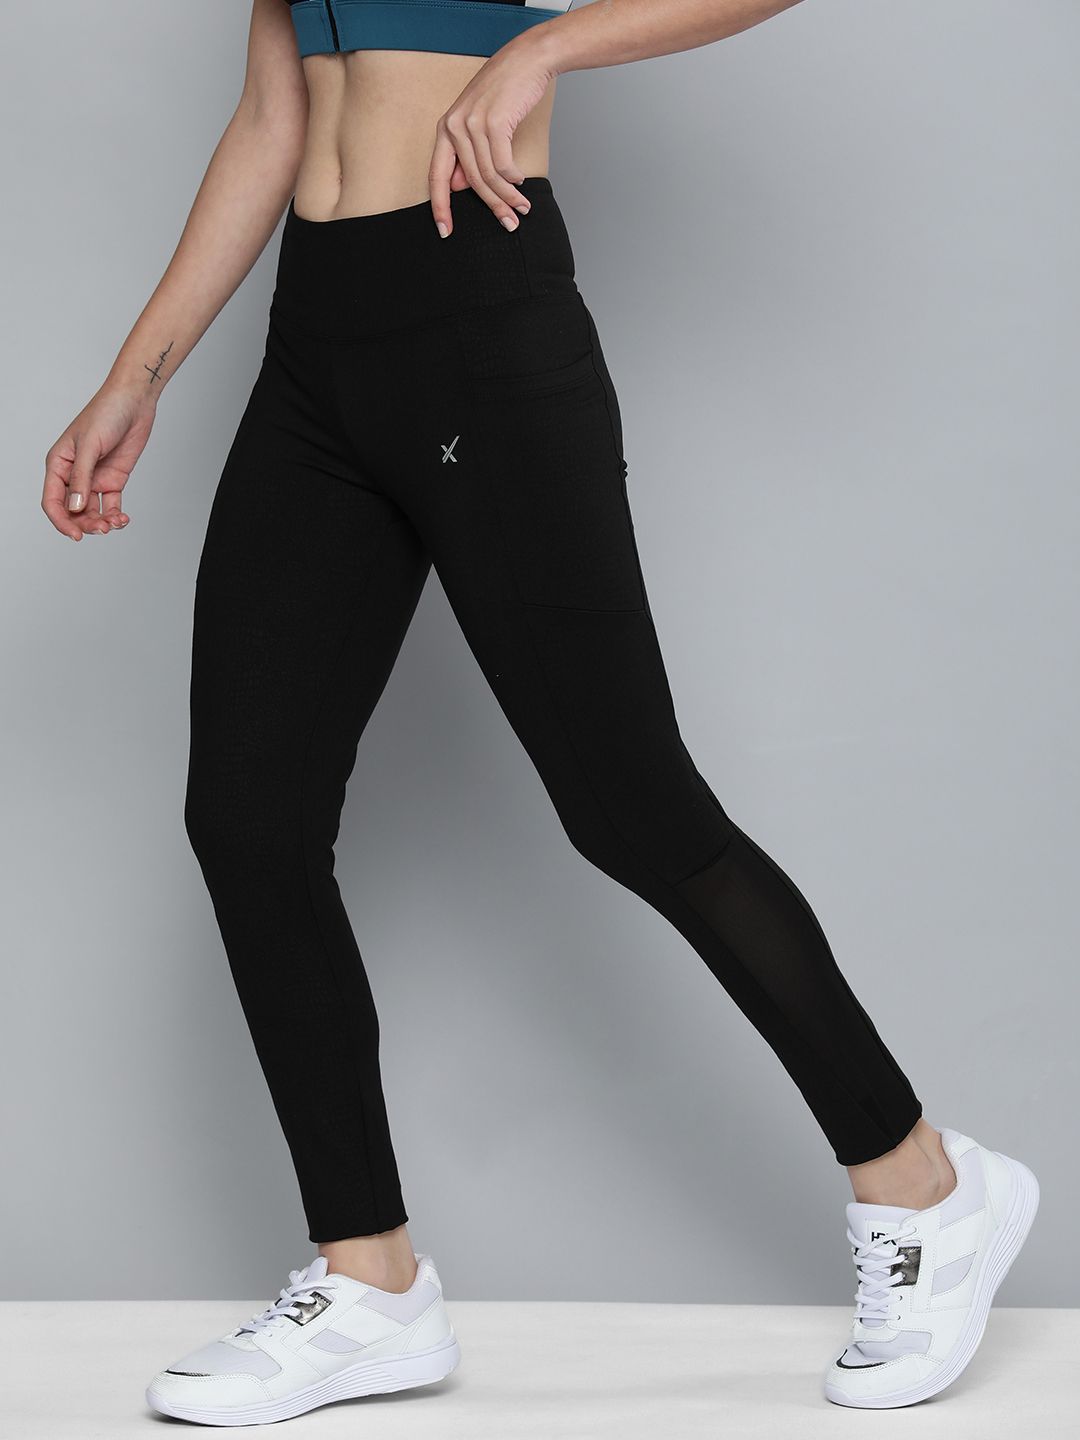 HRX By Hrithik Roshan Women Black Patterned Running Rapid-Dry Technology Tights Price in India